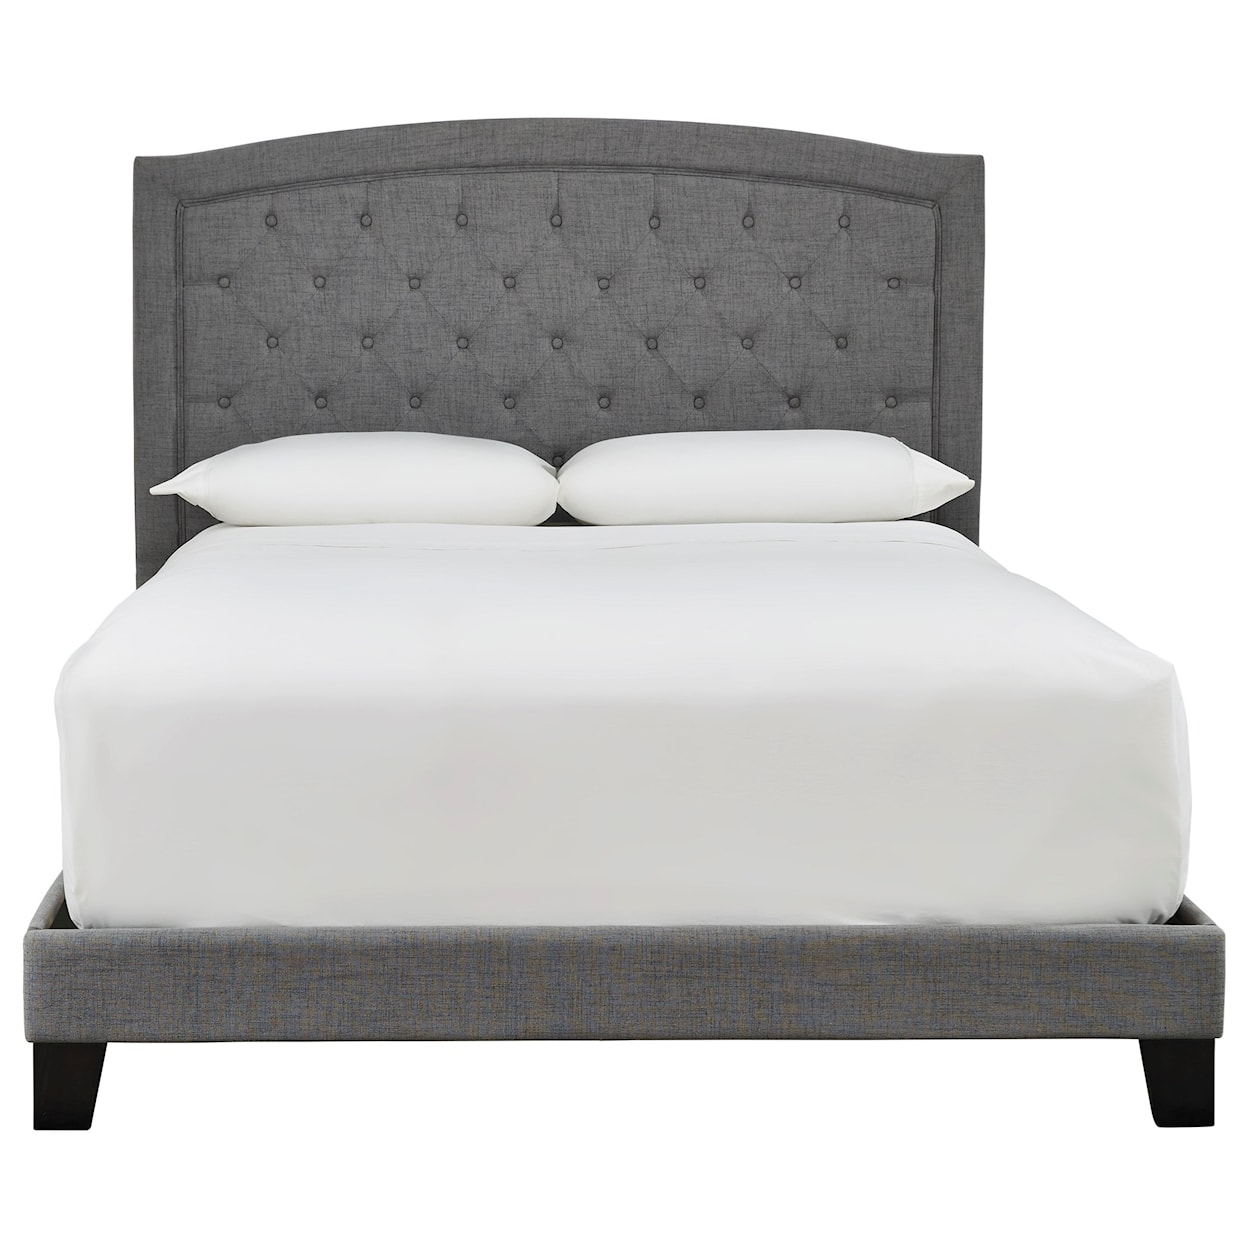 Ashley Signature Design Adelloni Queen Upholstered Bed